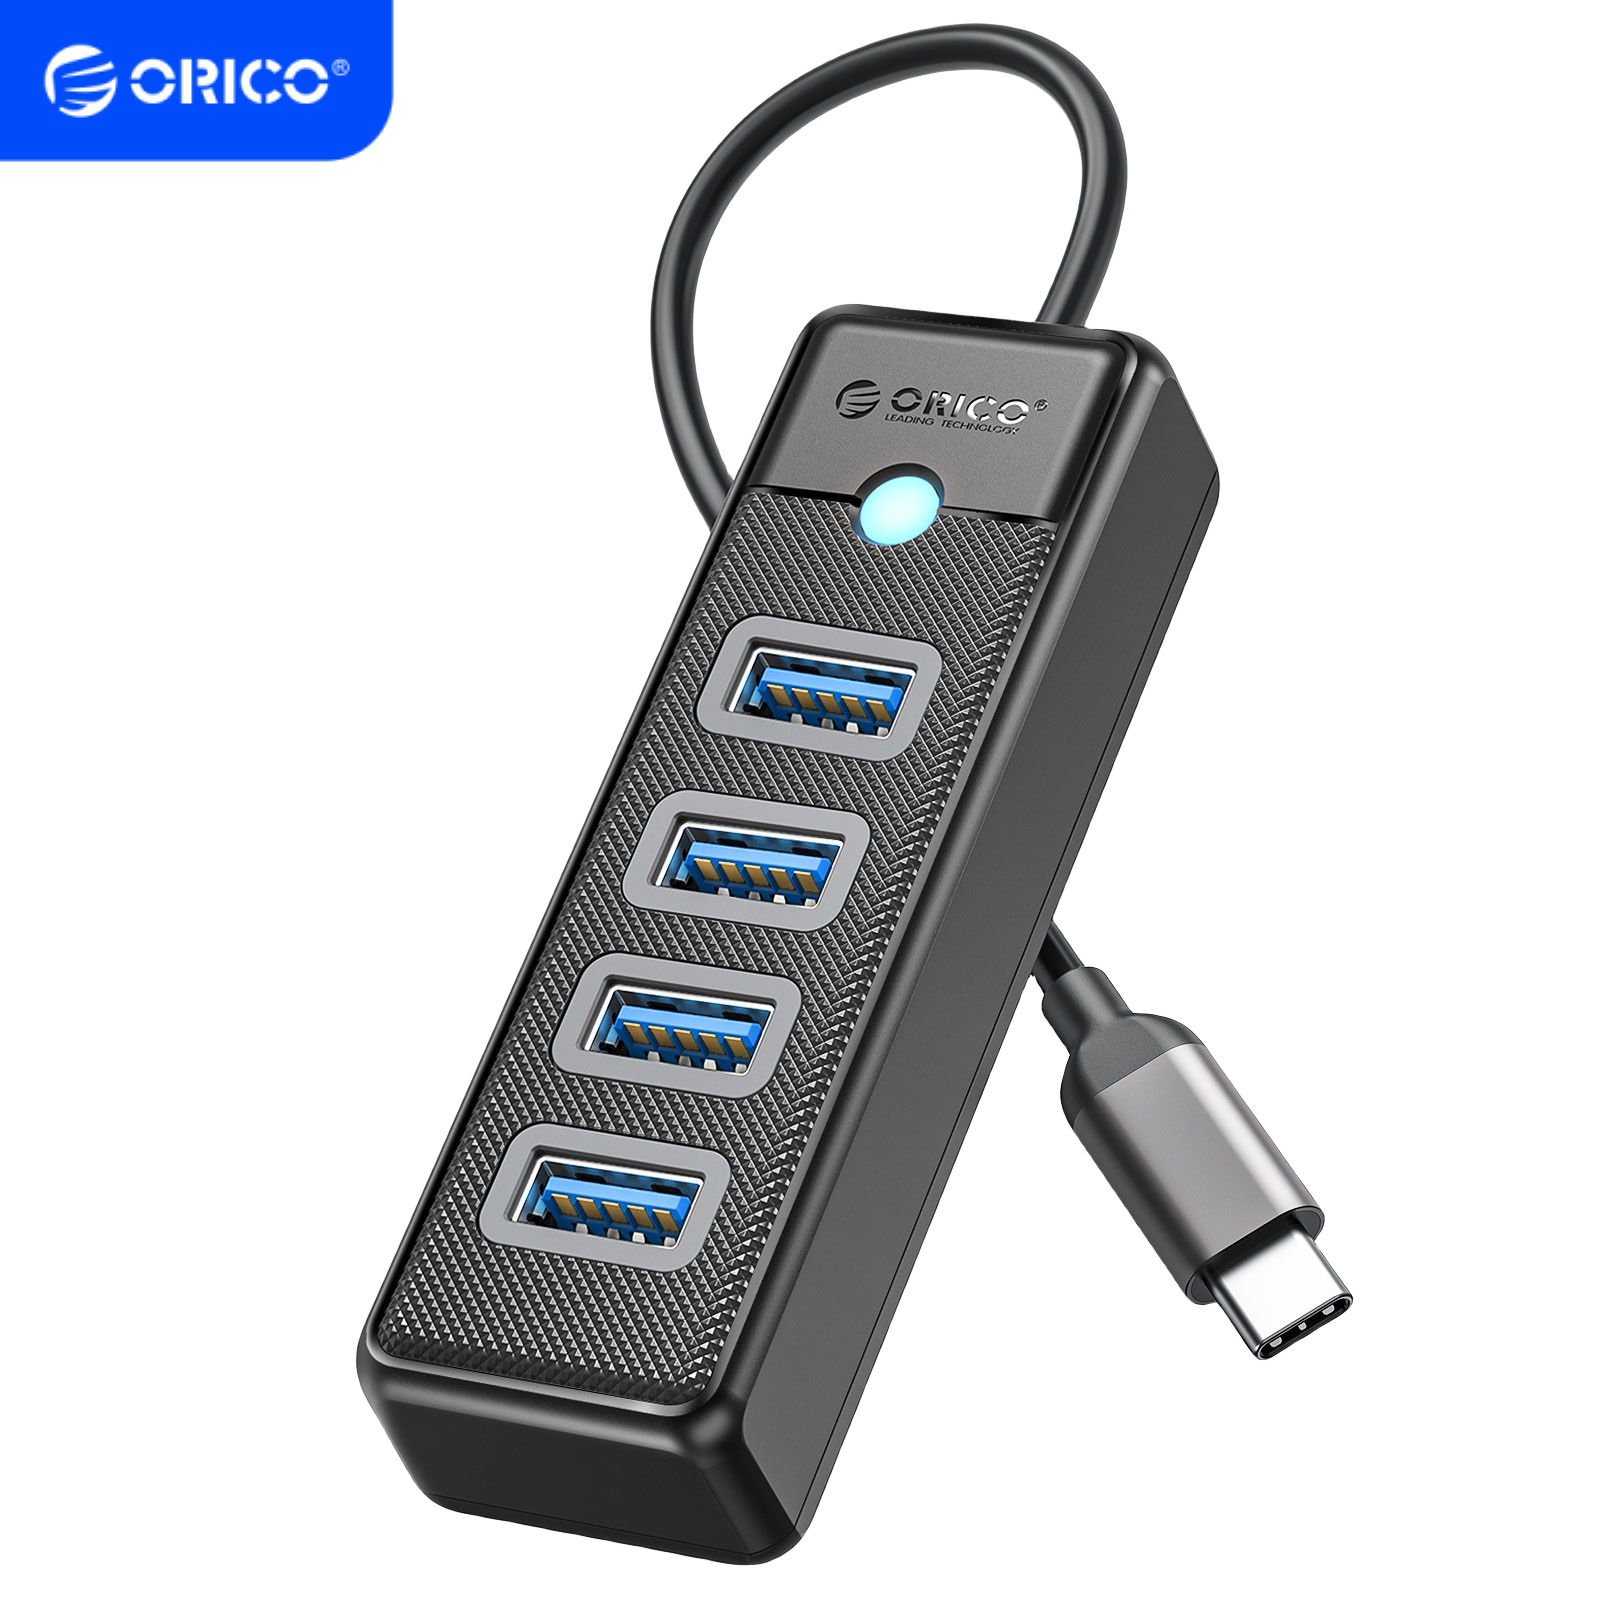 ORICO Type C to 4 Port USB 3.0 Hub High Speed USB Splitter for Laptop Xbox Mouse